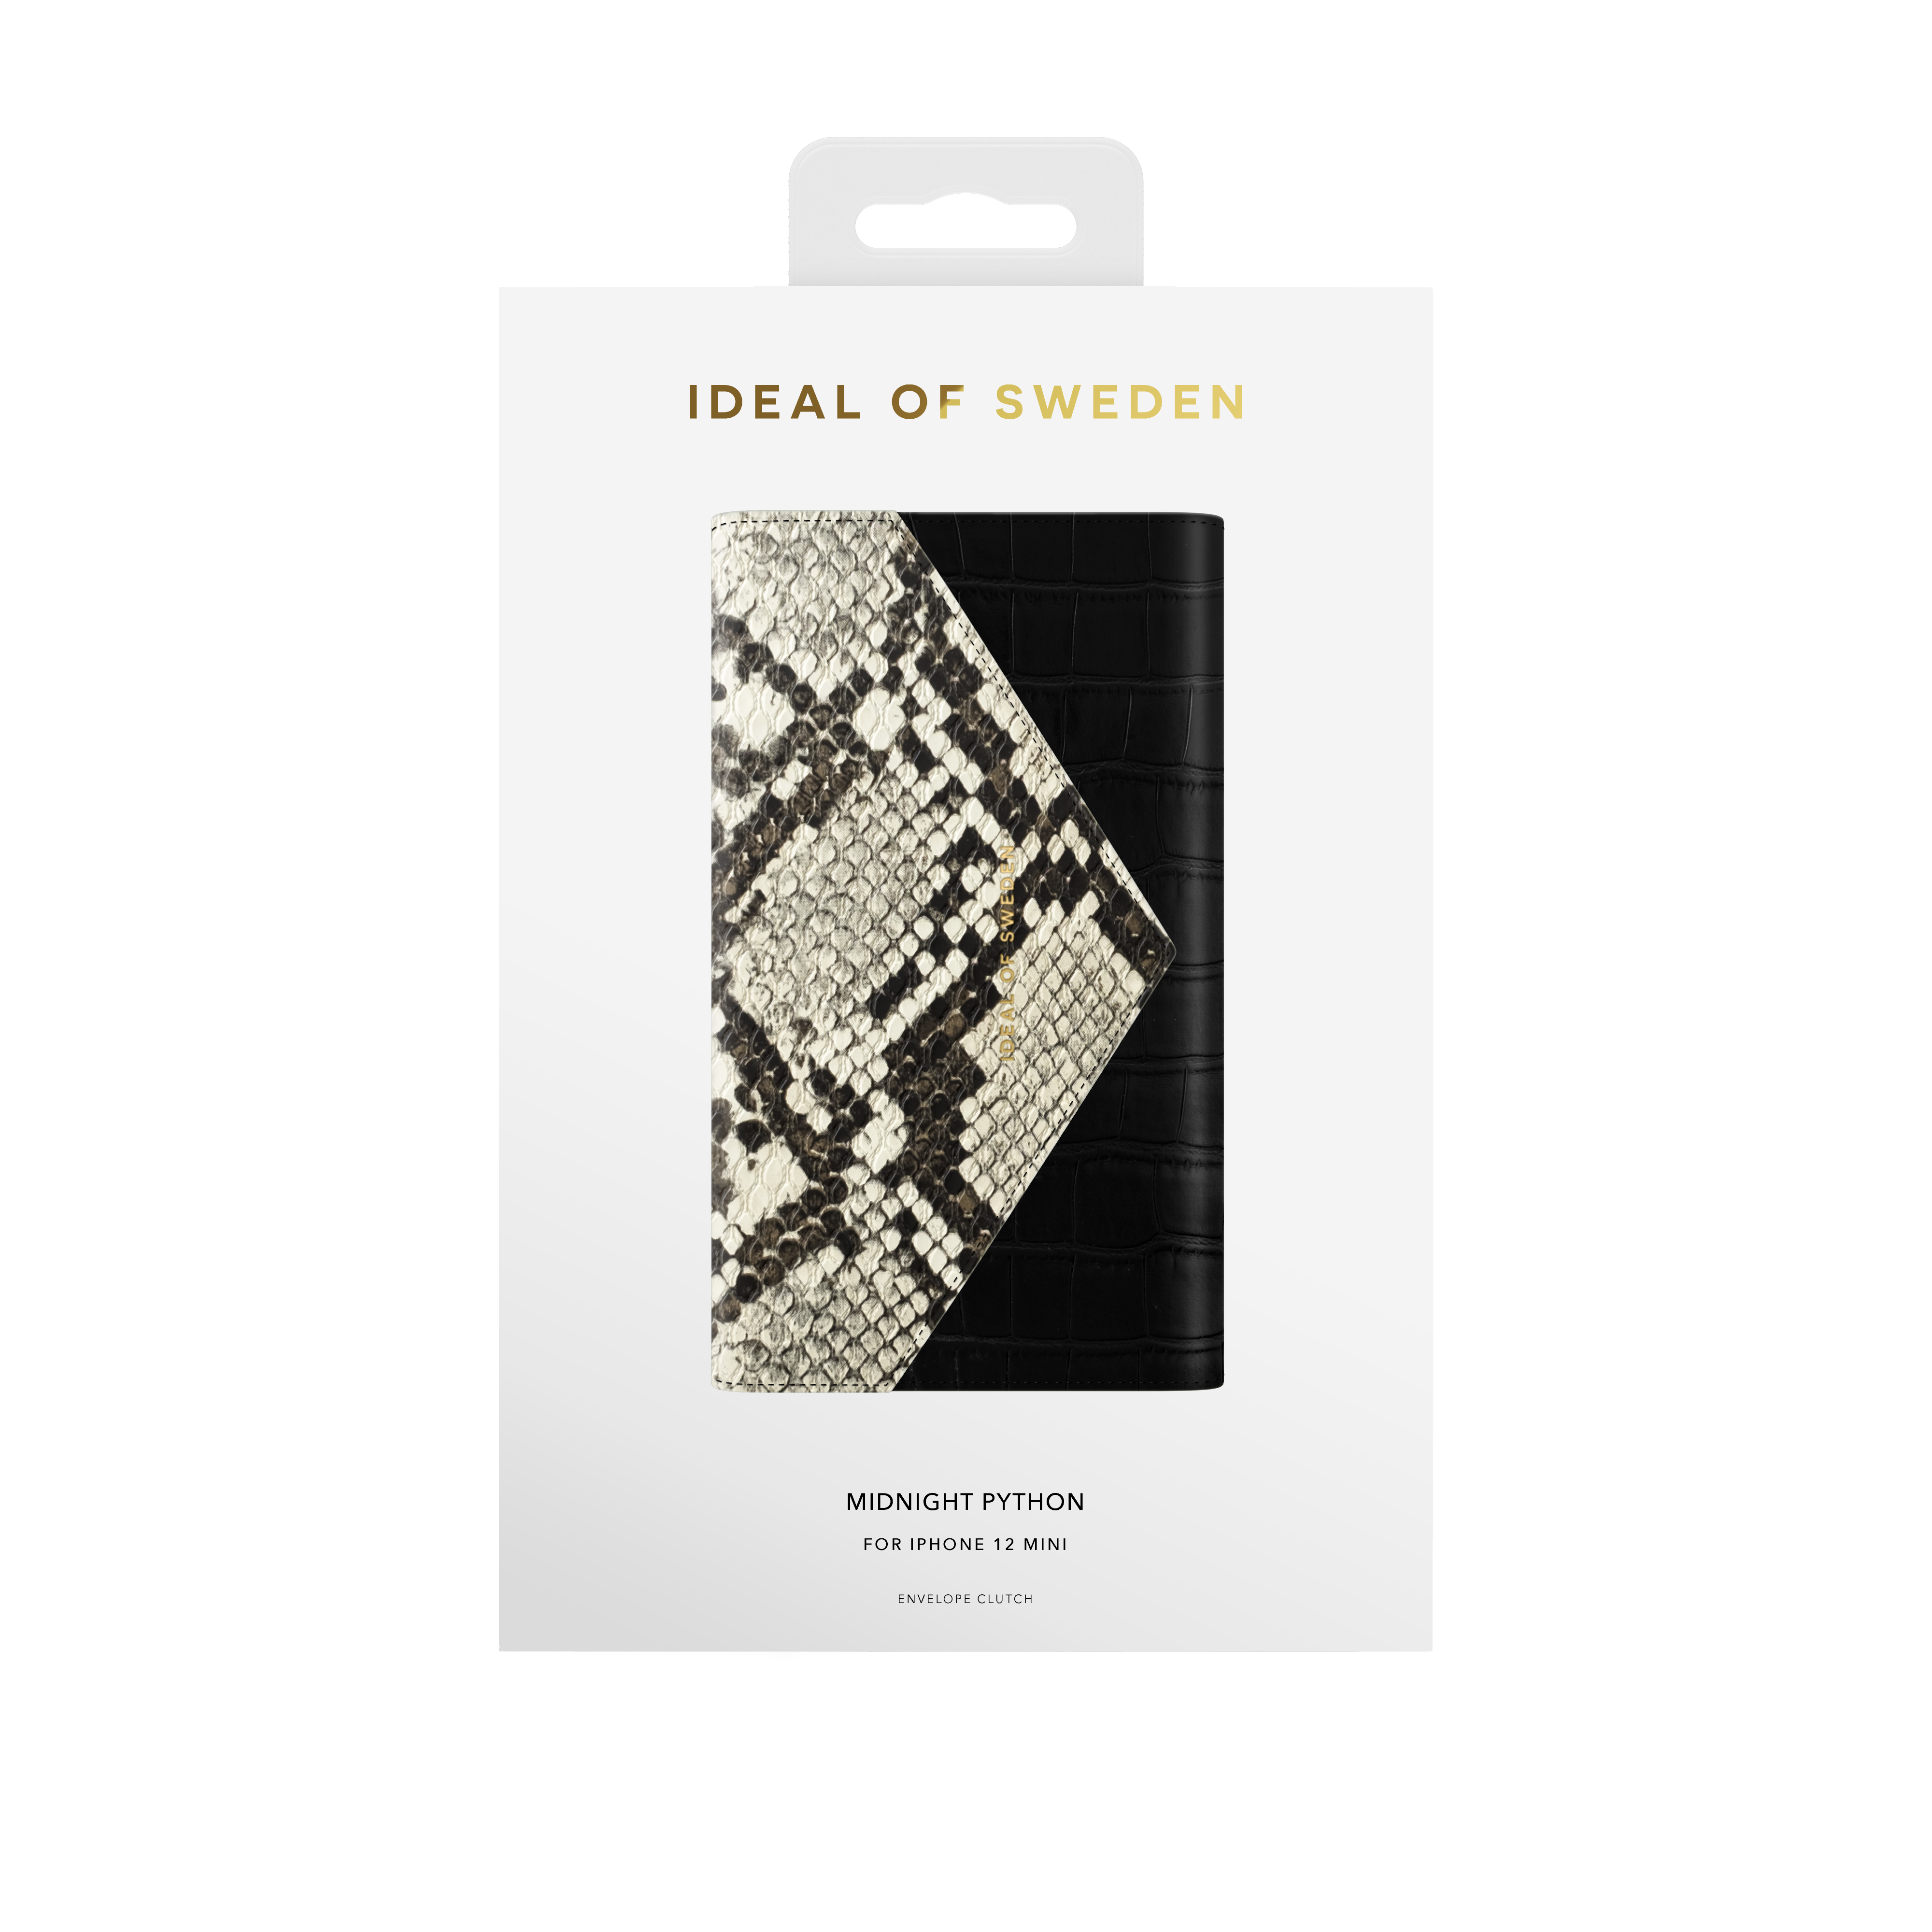 IDECSS20-I2054-199, 12 Cover, Mini, Python IDEAL OF SWEDEN Full Apple, IPhone Midnight